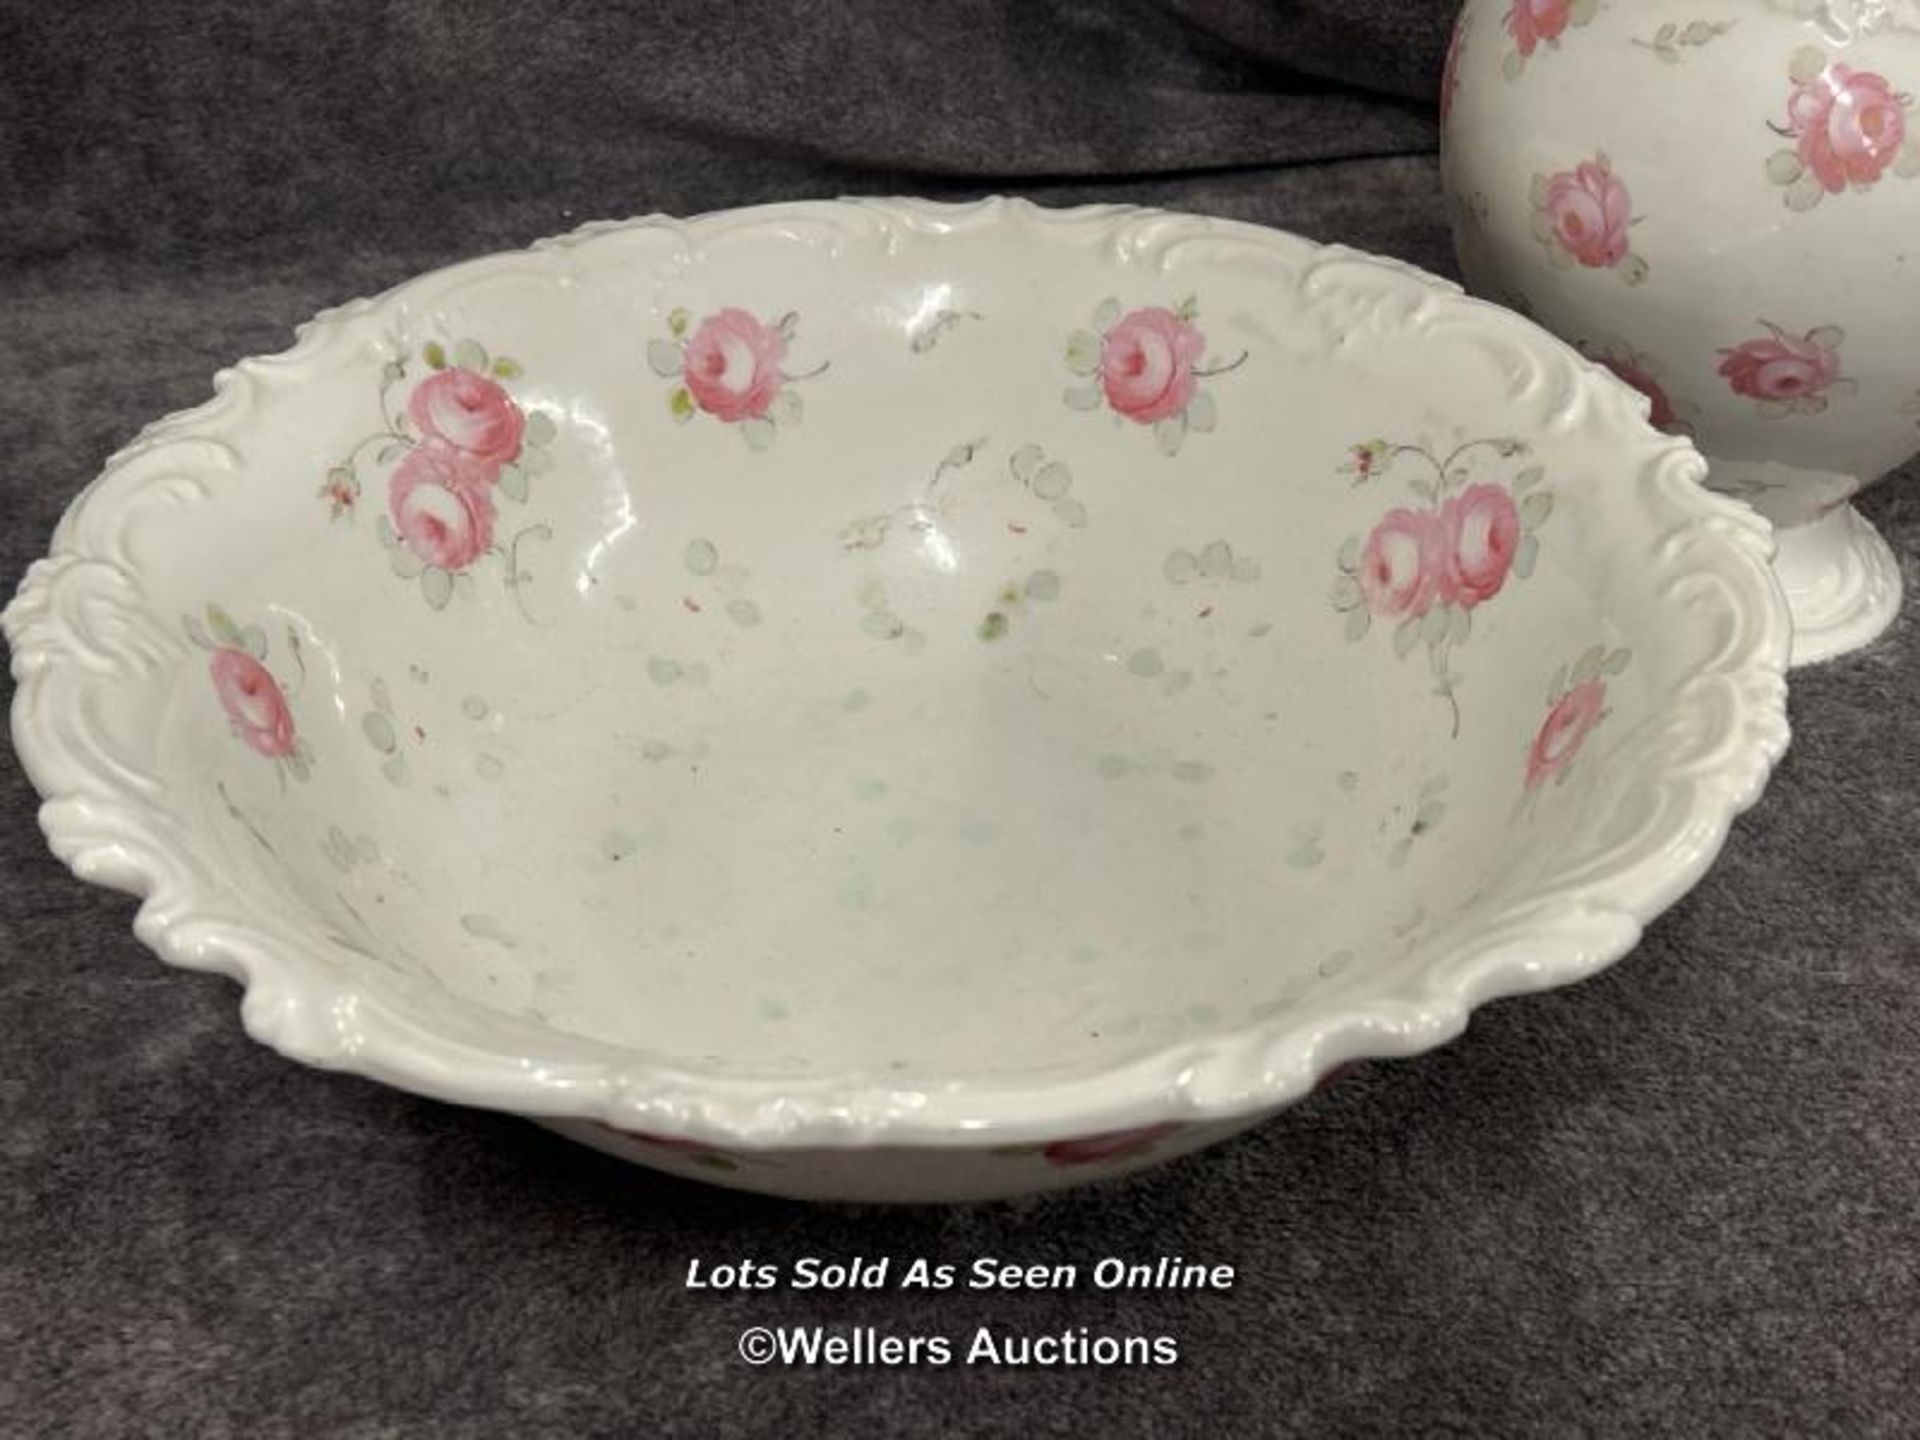 Large rose pattern wash bowl with water jug and faux flowers / AN43 - Image 2 of 5